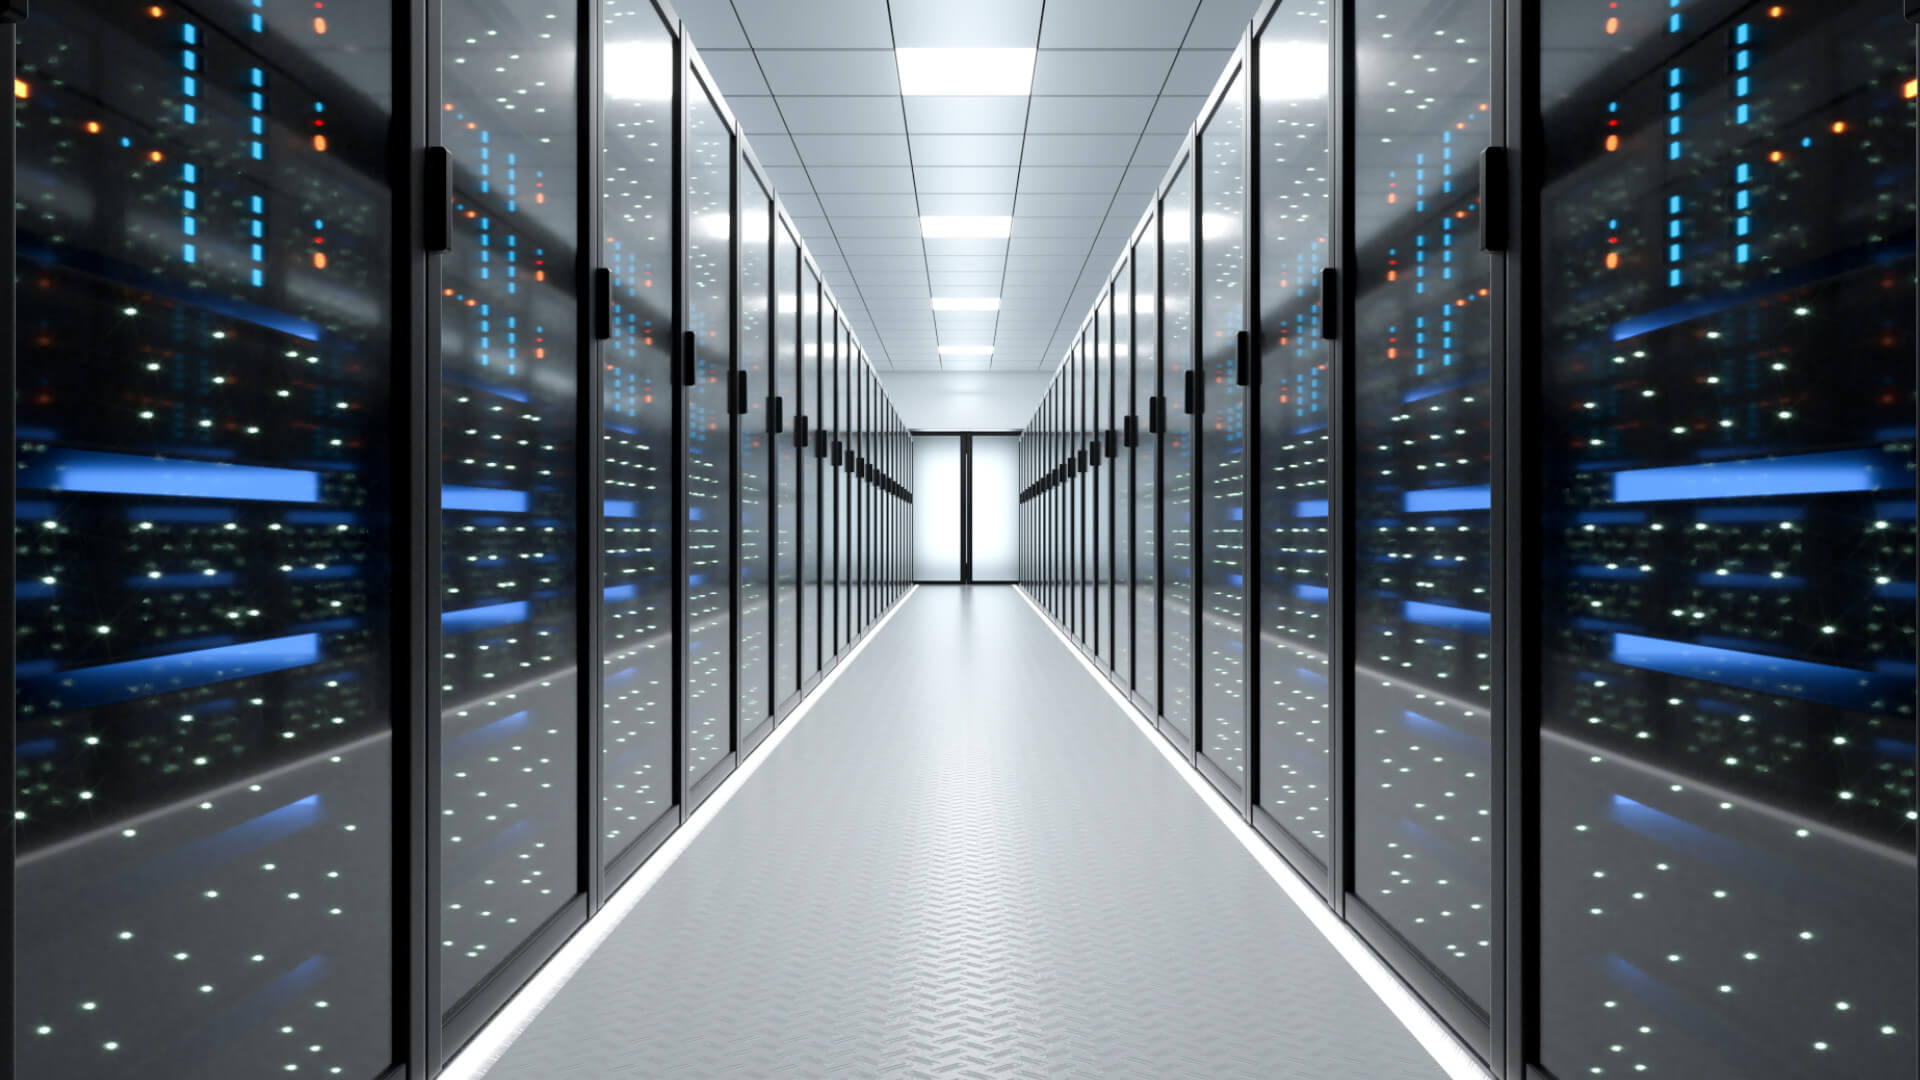 Africa is rapidly emerging as a major player in the global data center market, with a number of countries investing heavily in the development of data centers